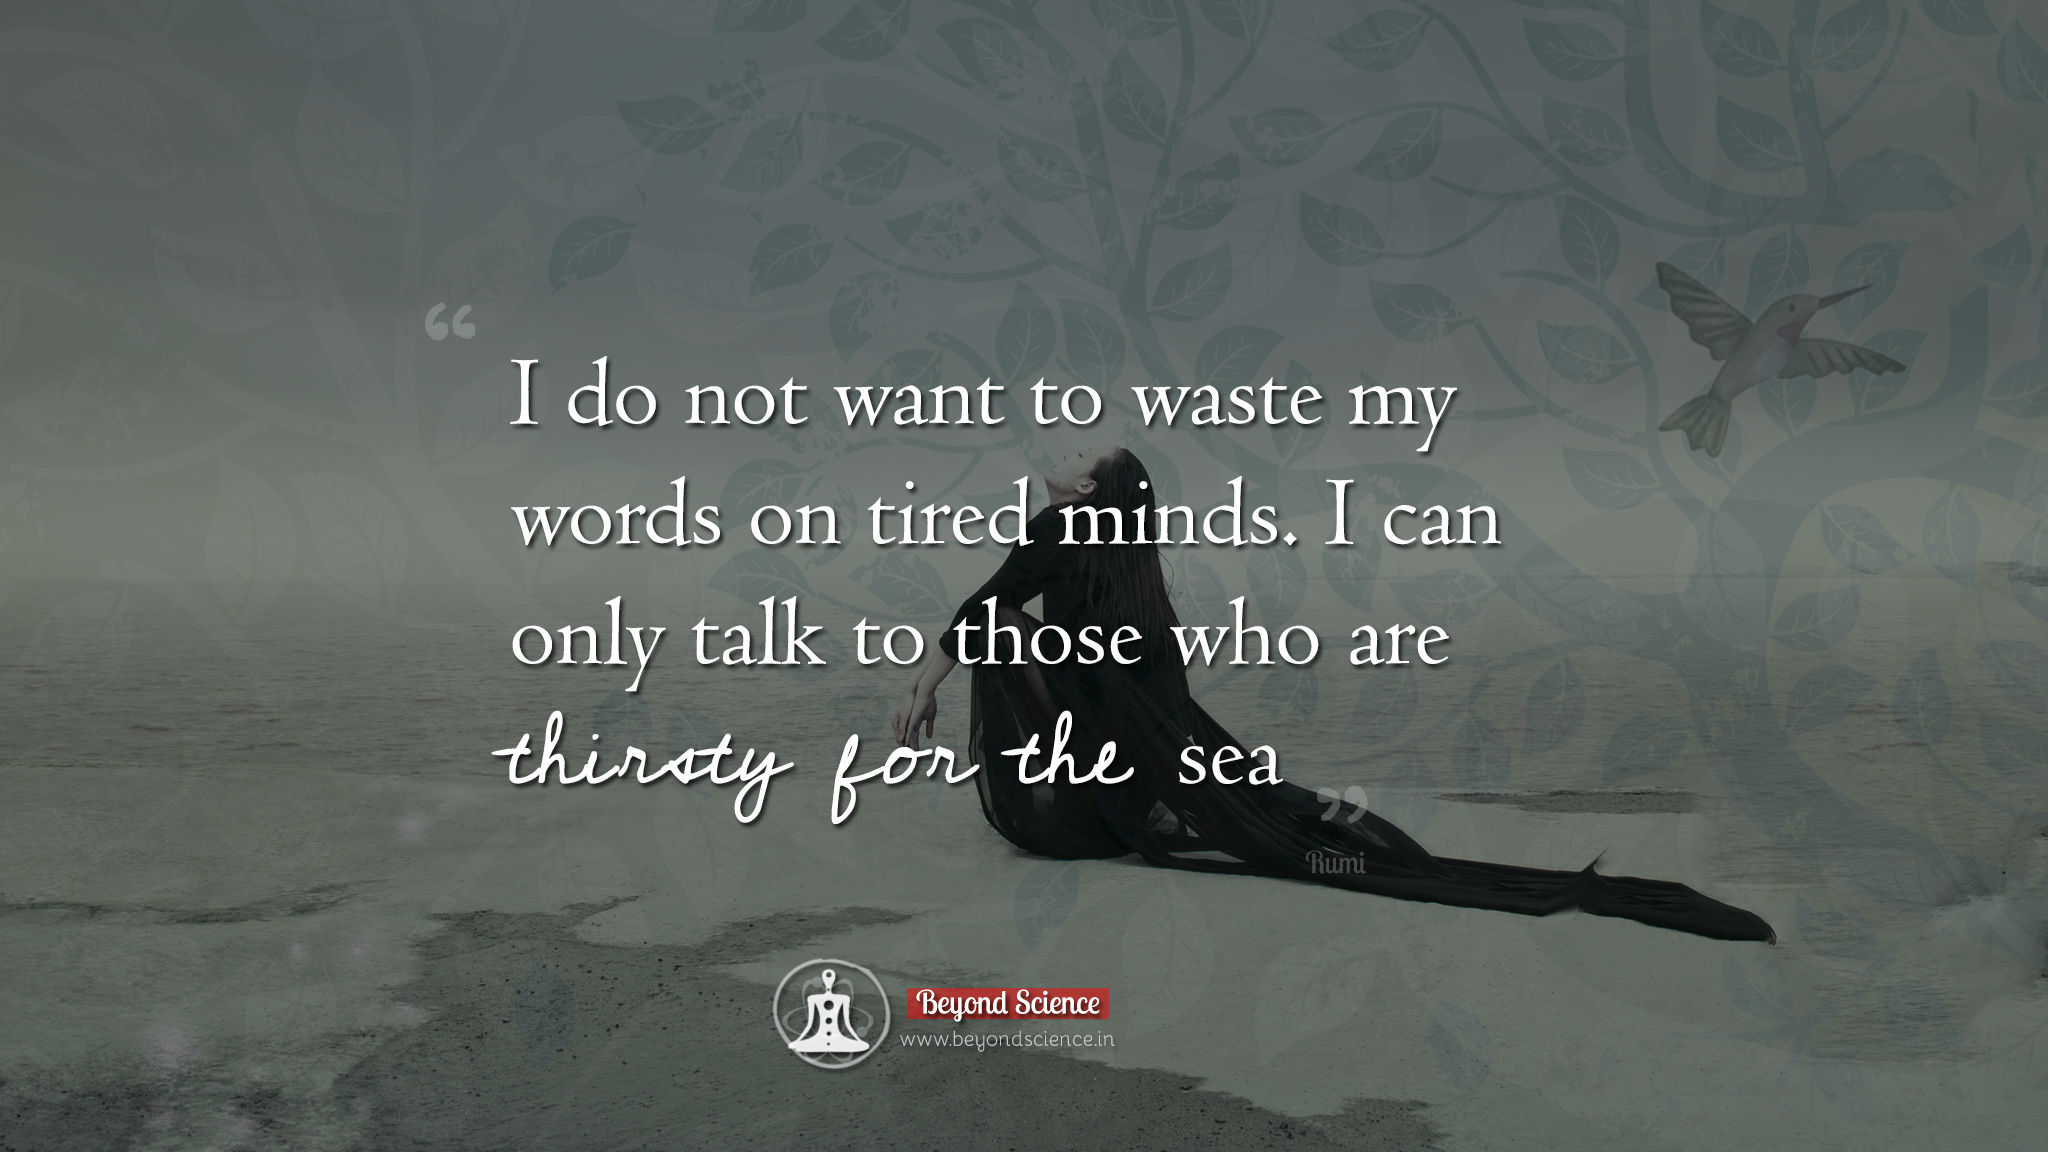 I do not want to waste my words on tired minds. I can only talk to those who are thirsty for the sea